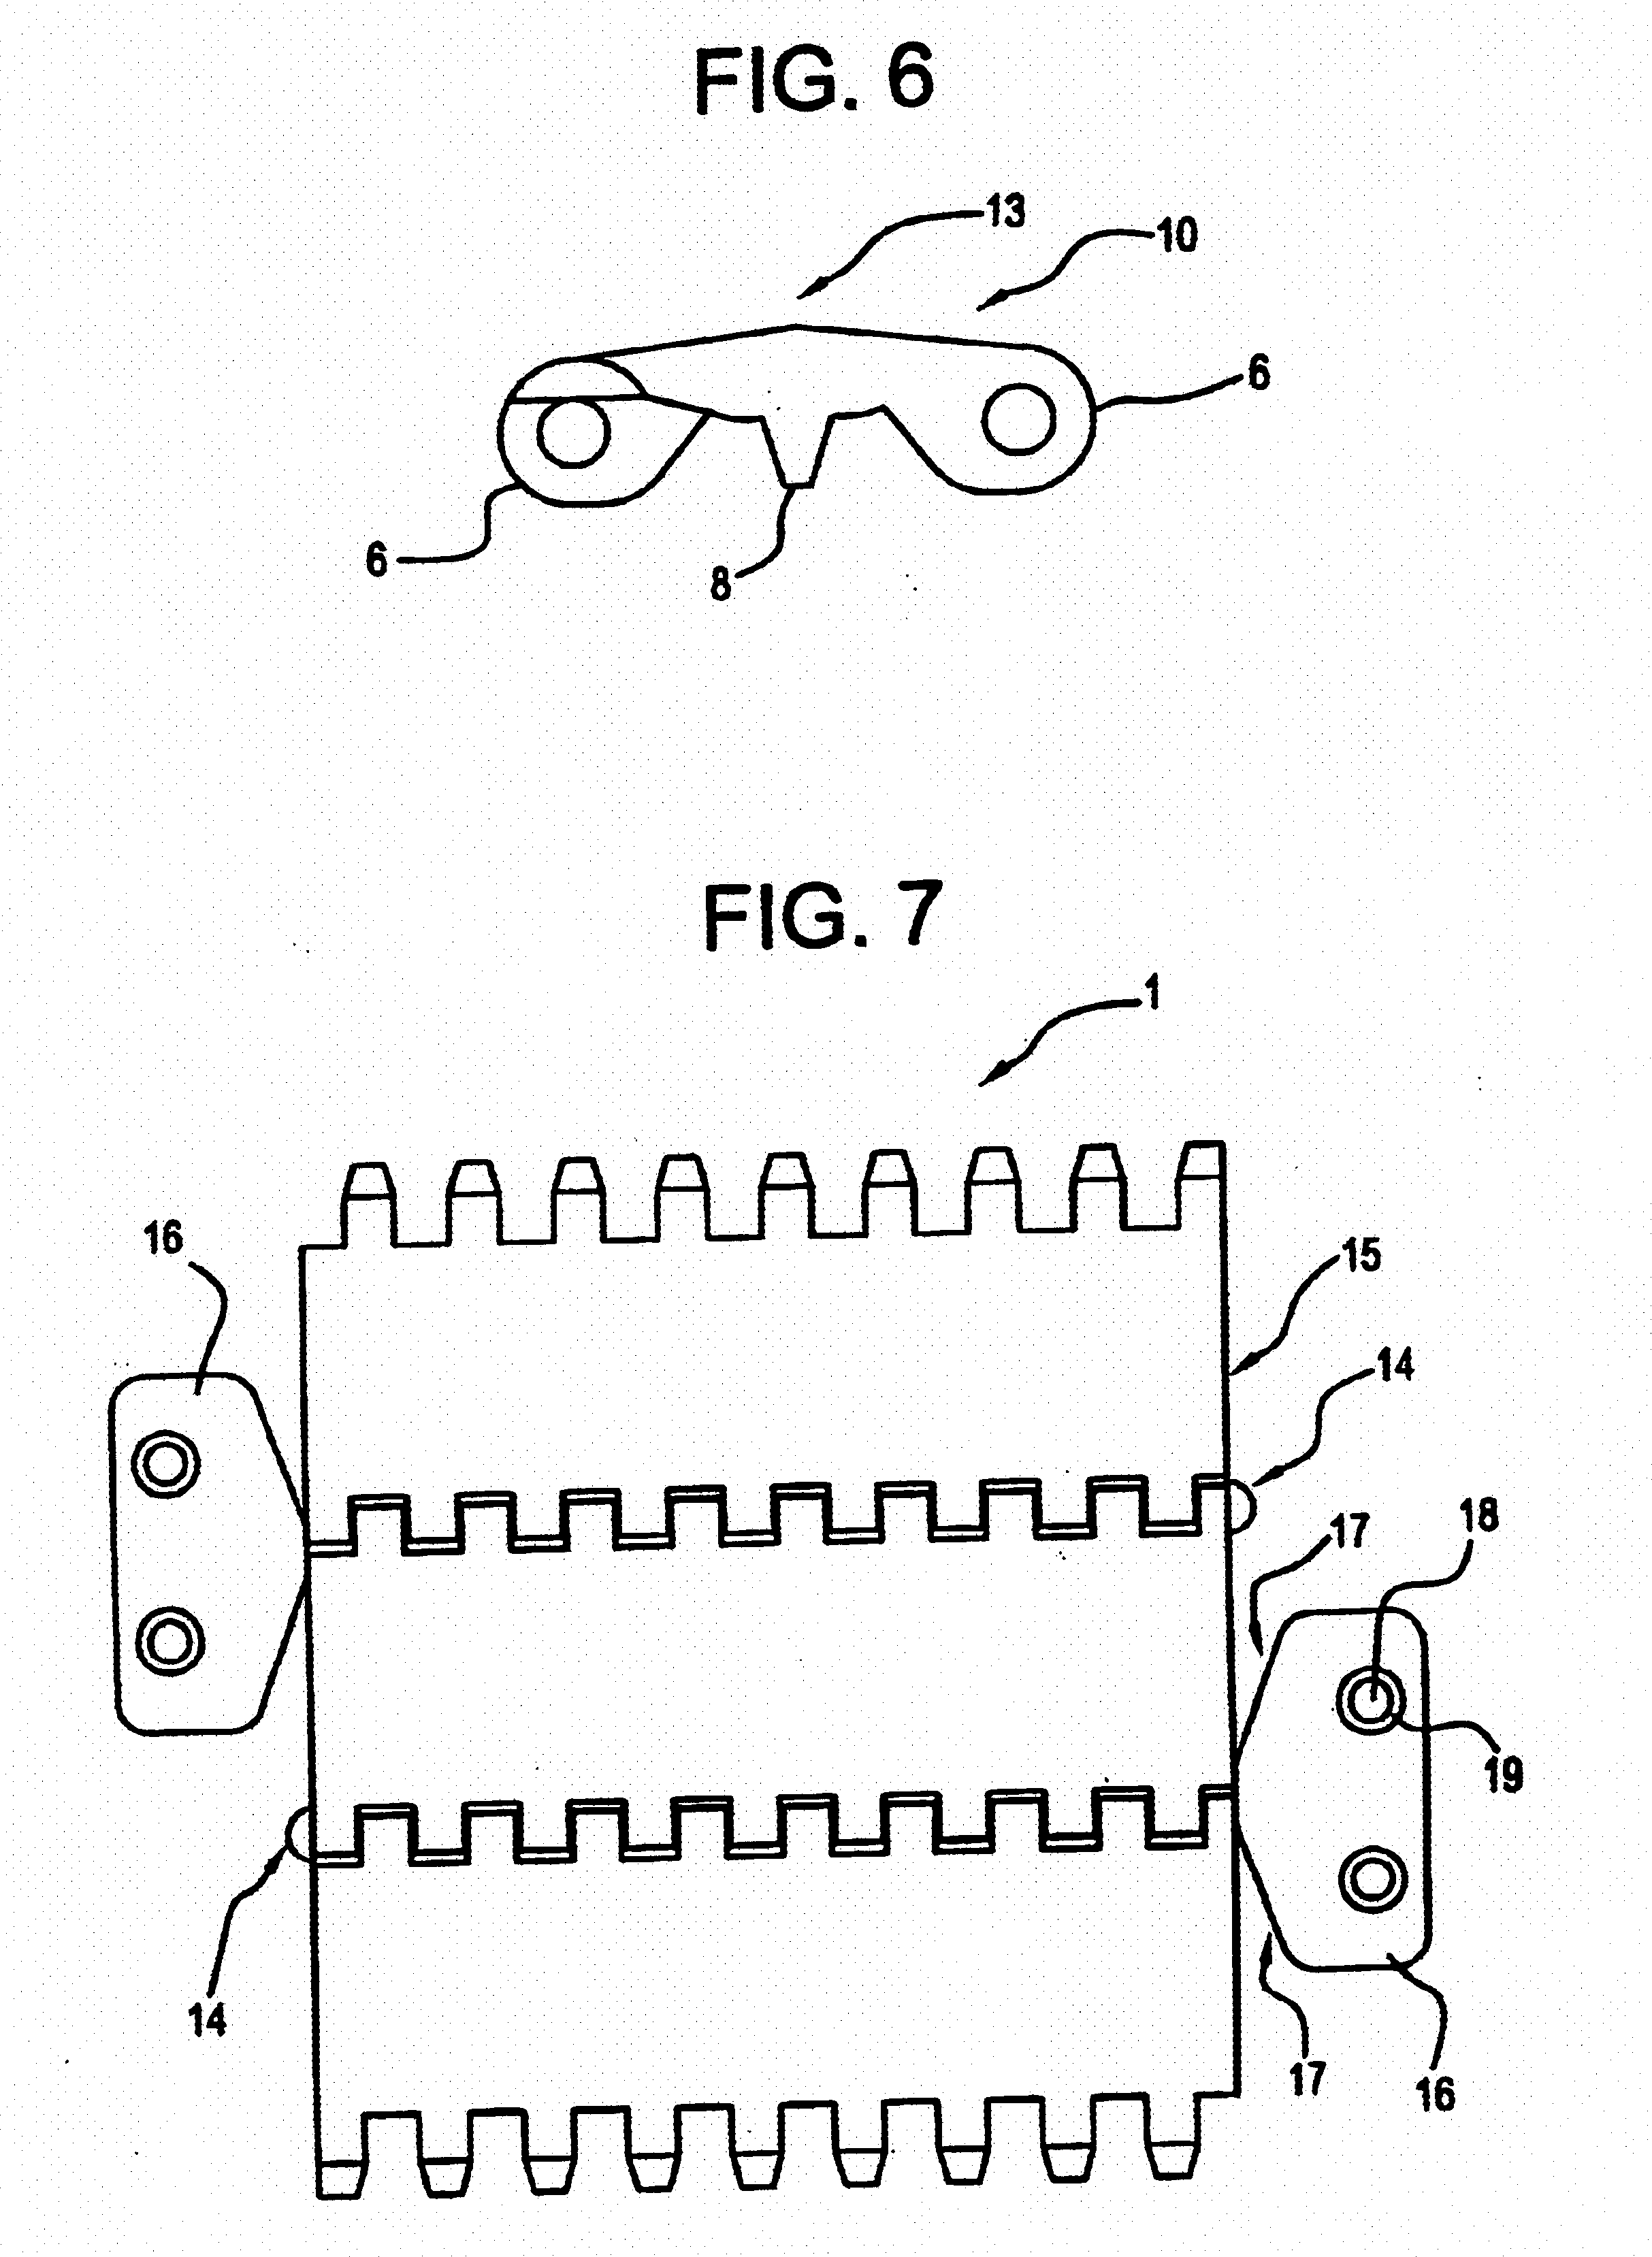 Wide chain link conveyor structure